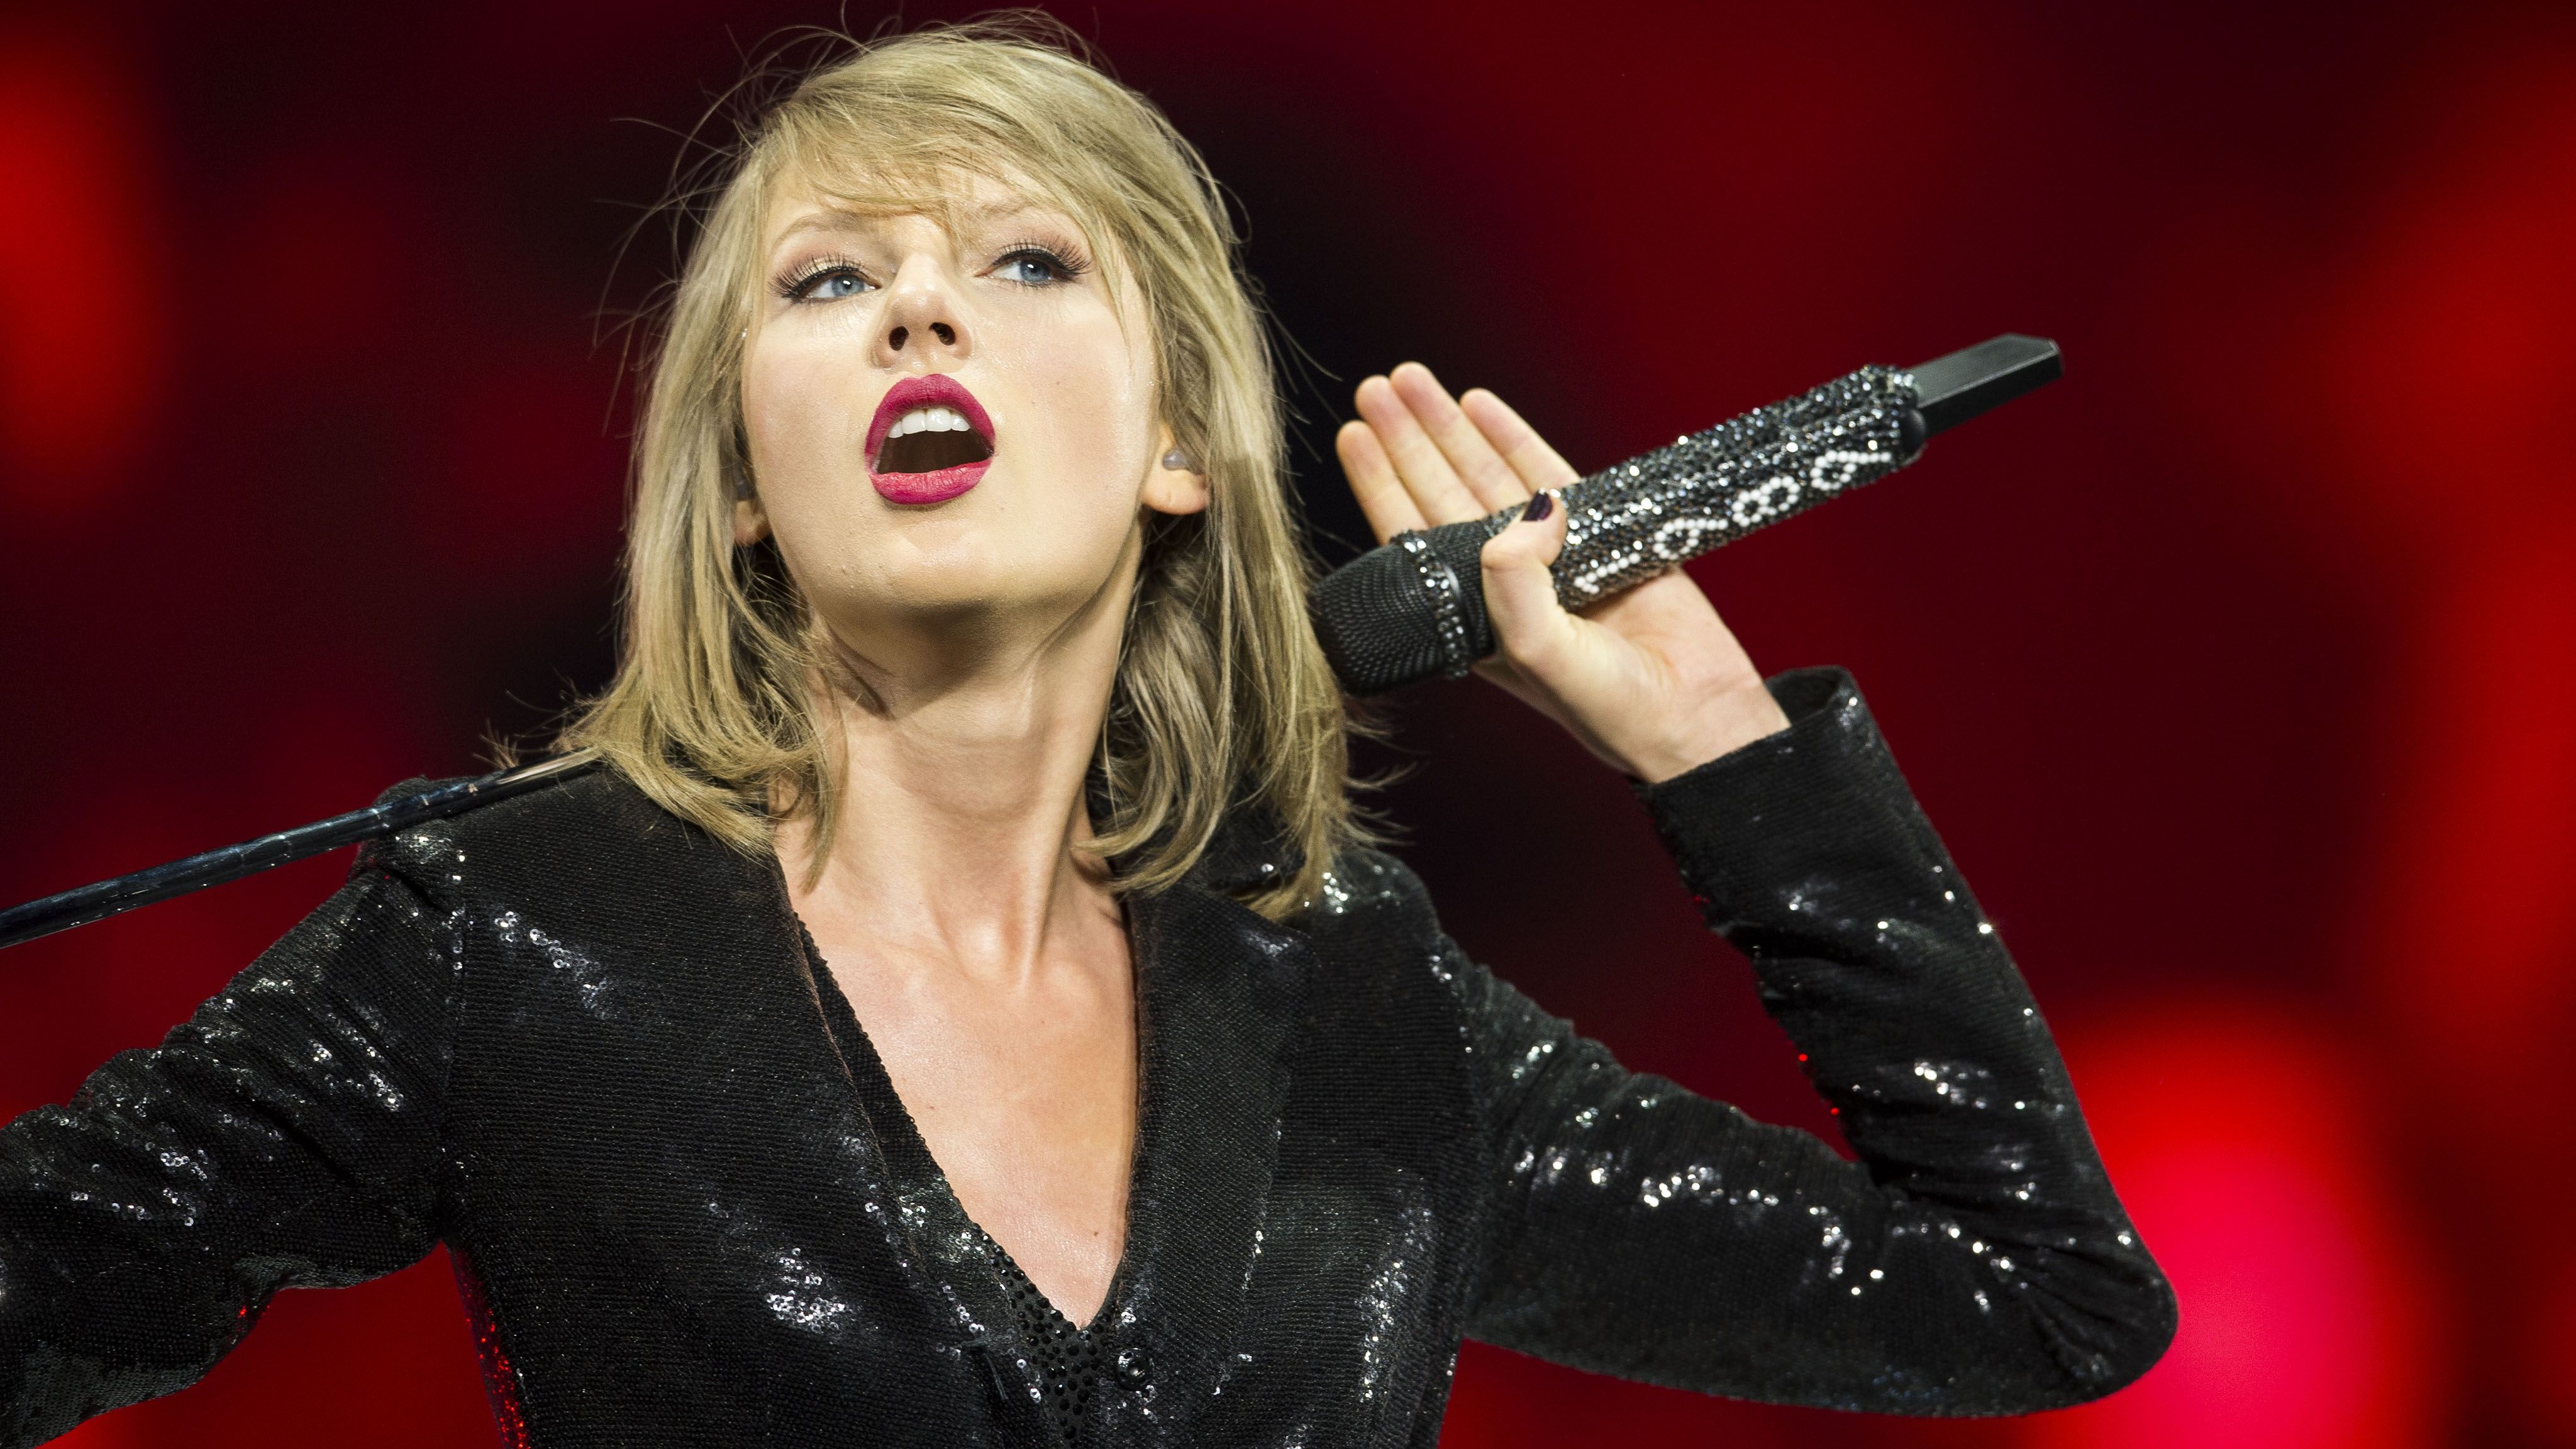 Hark! The Taylor Swift video games sing